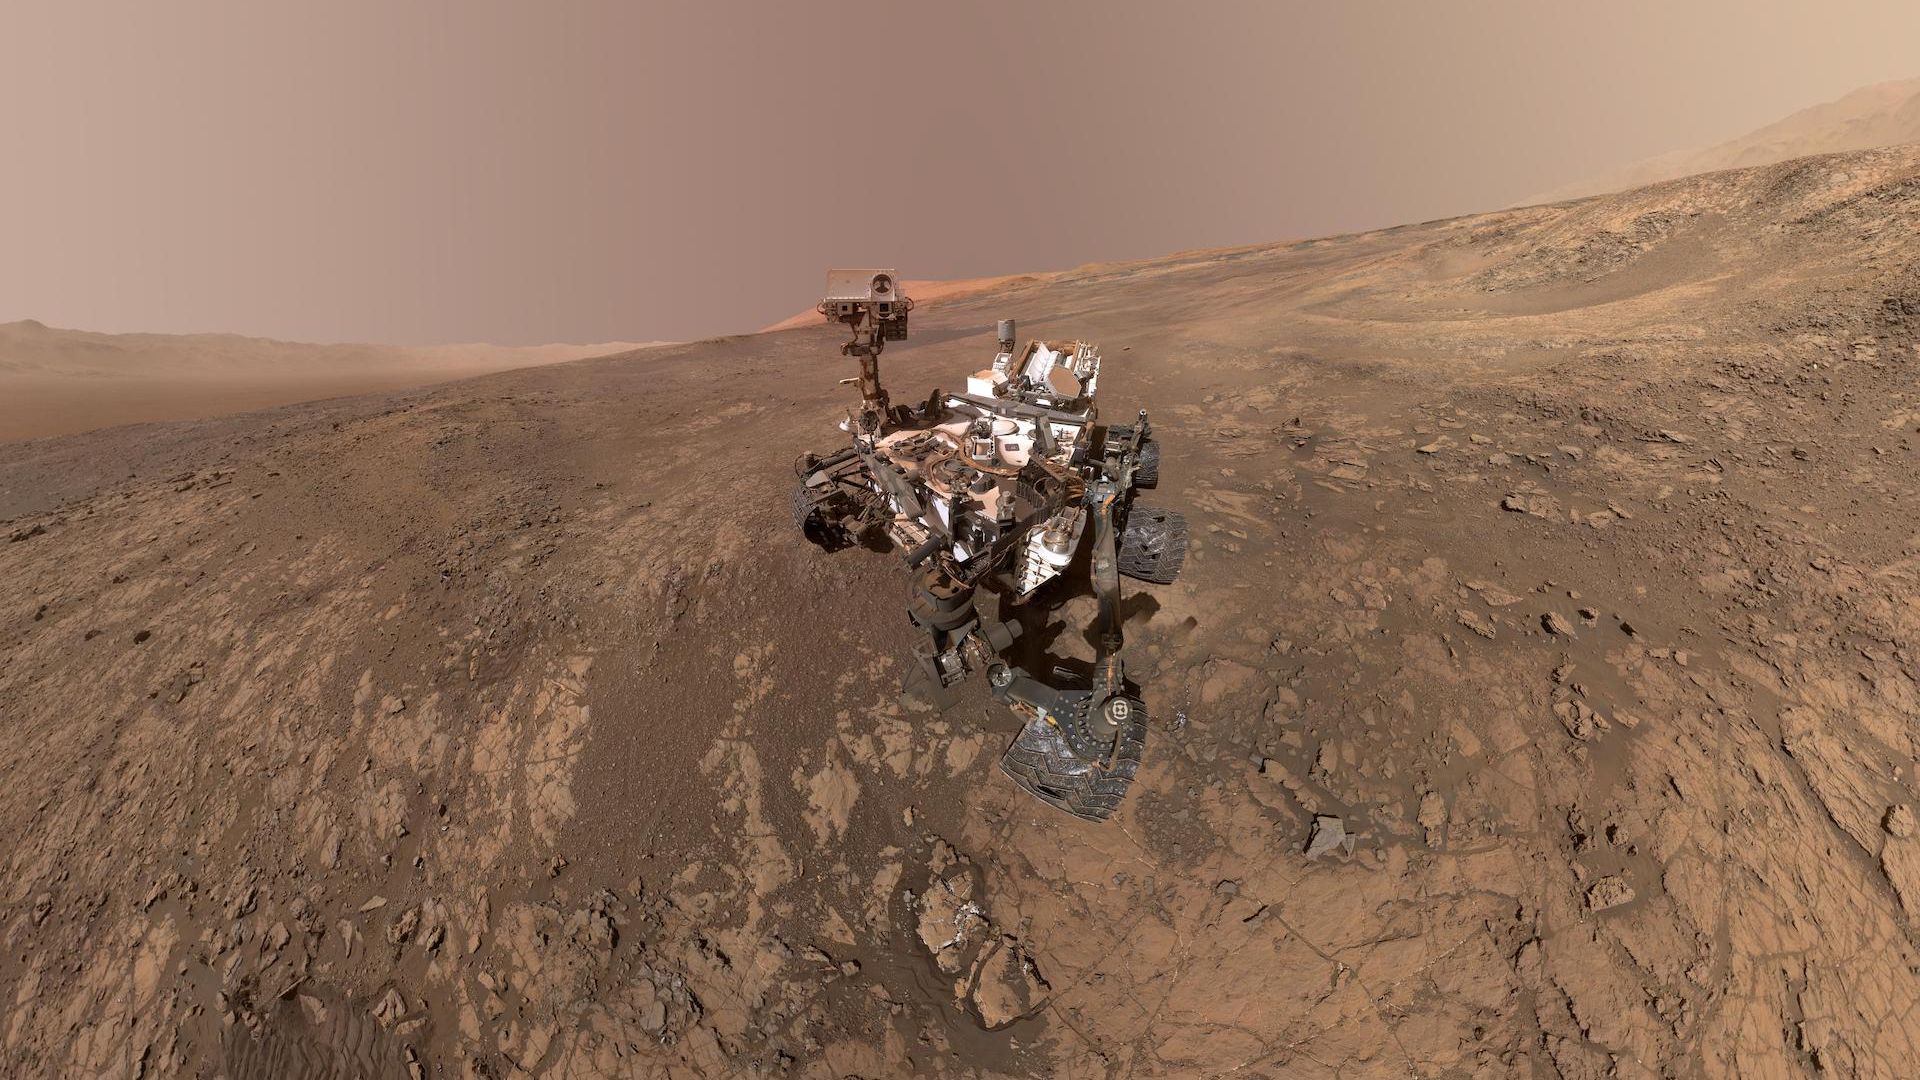 A selfie taken by the Curiosity rover on Mars